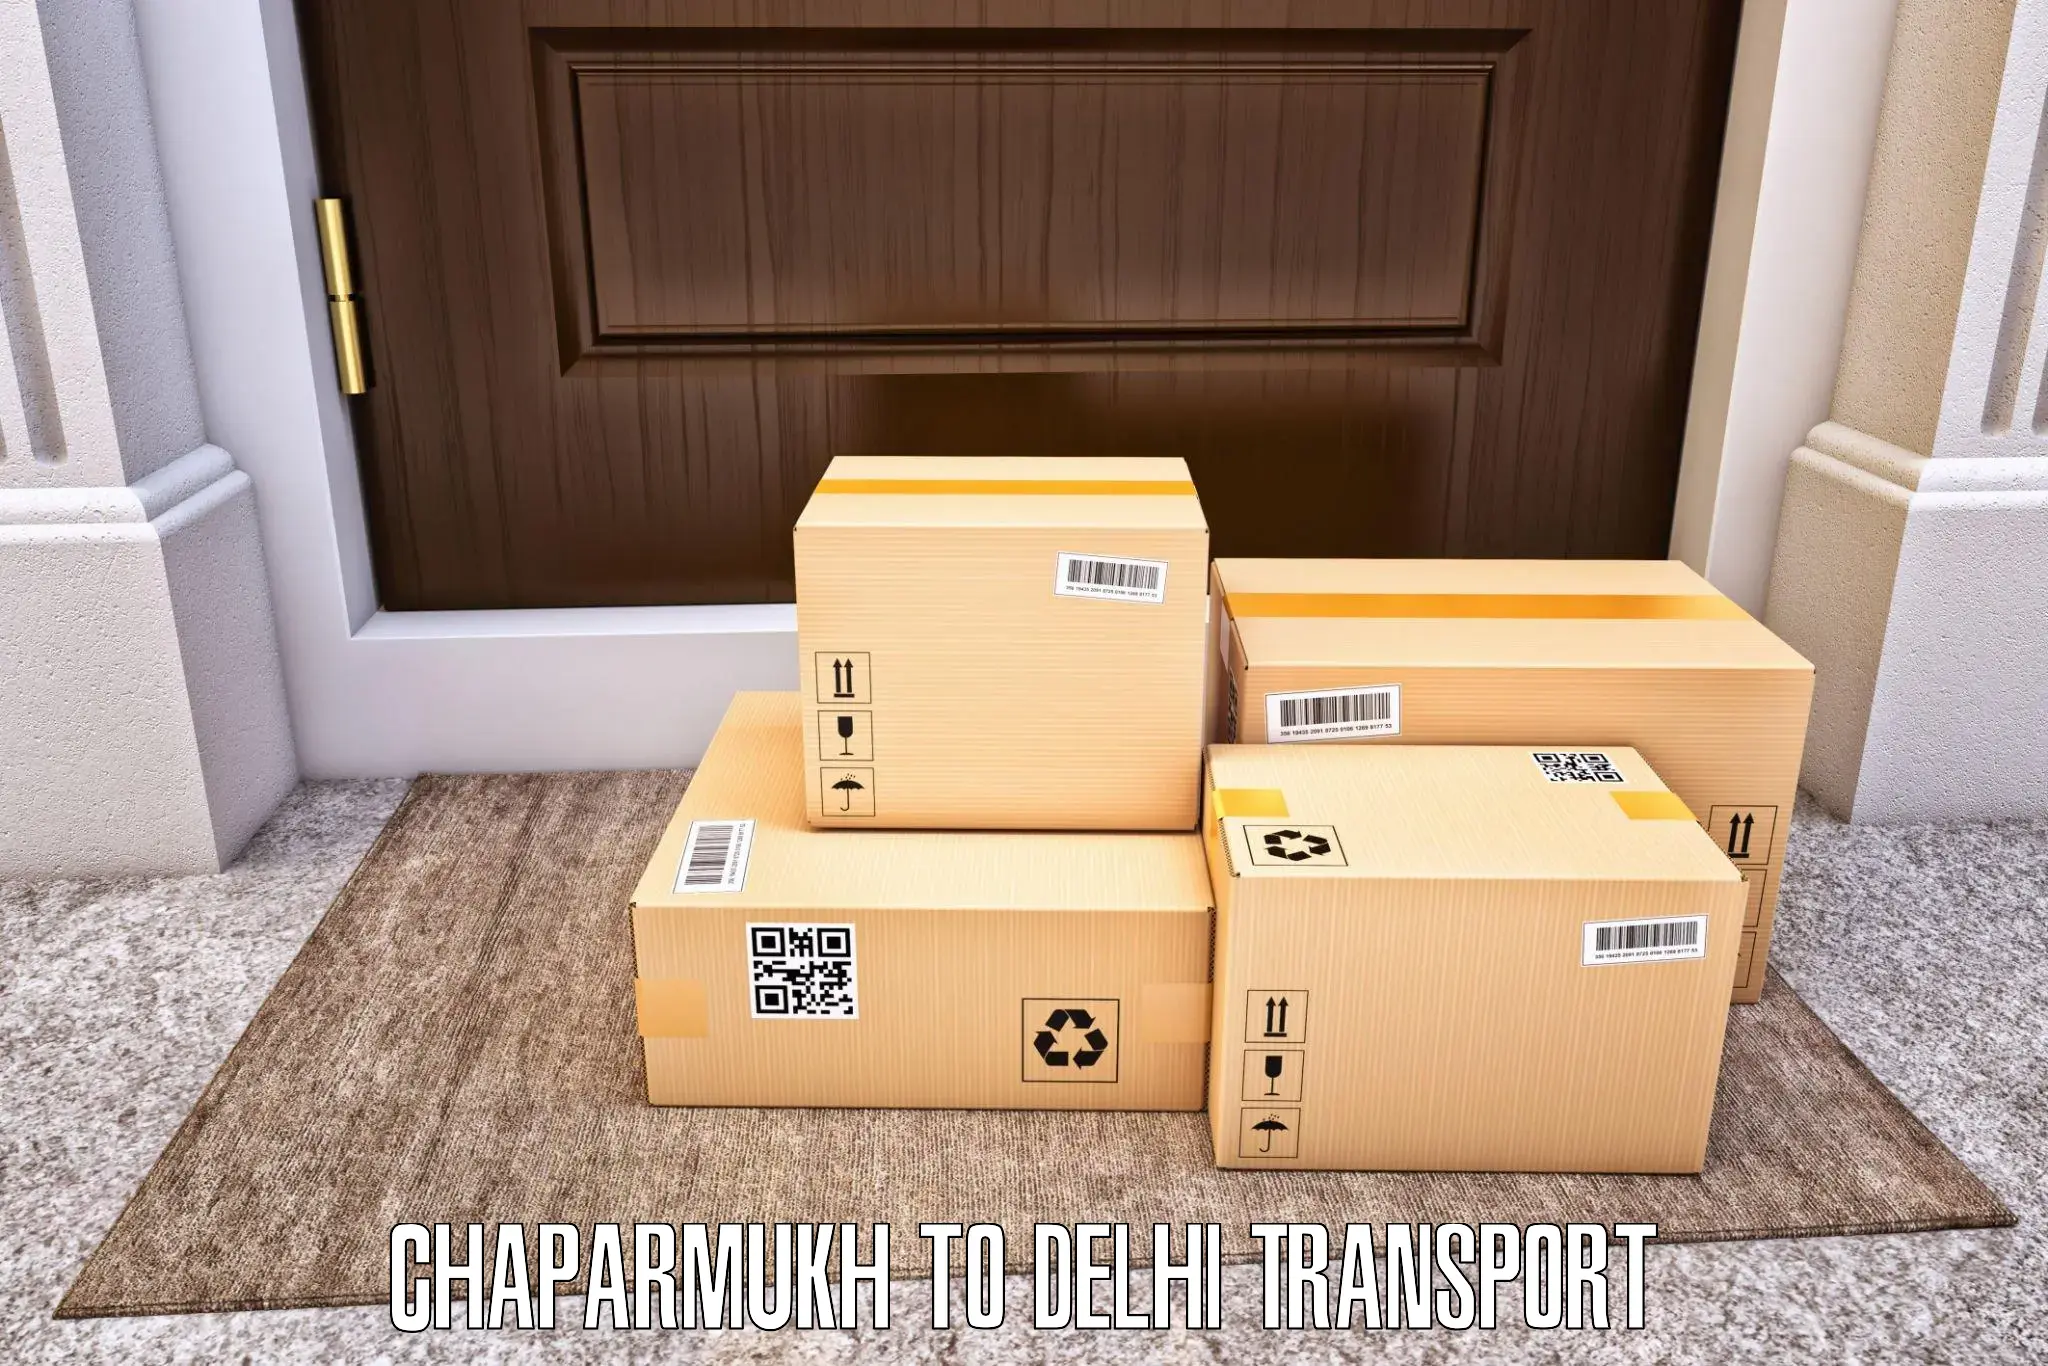 Shipping services Chaparmukh to IIT Delhi